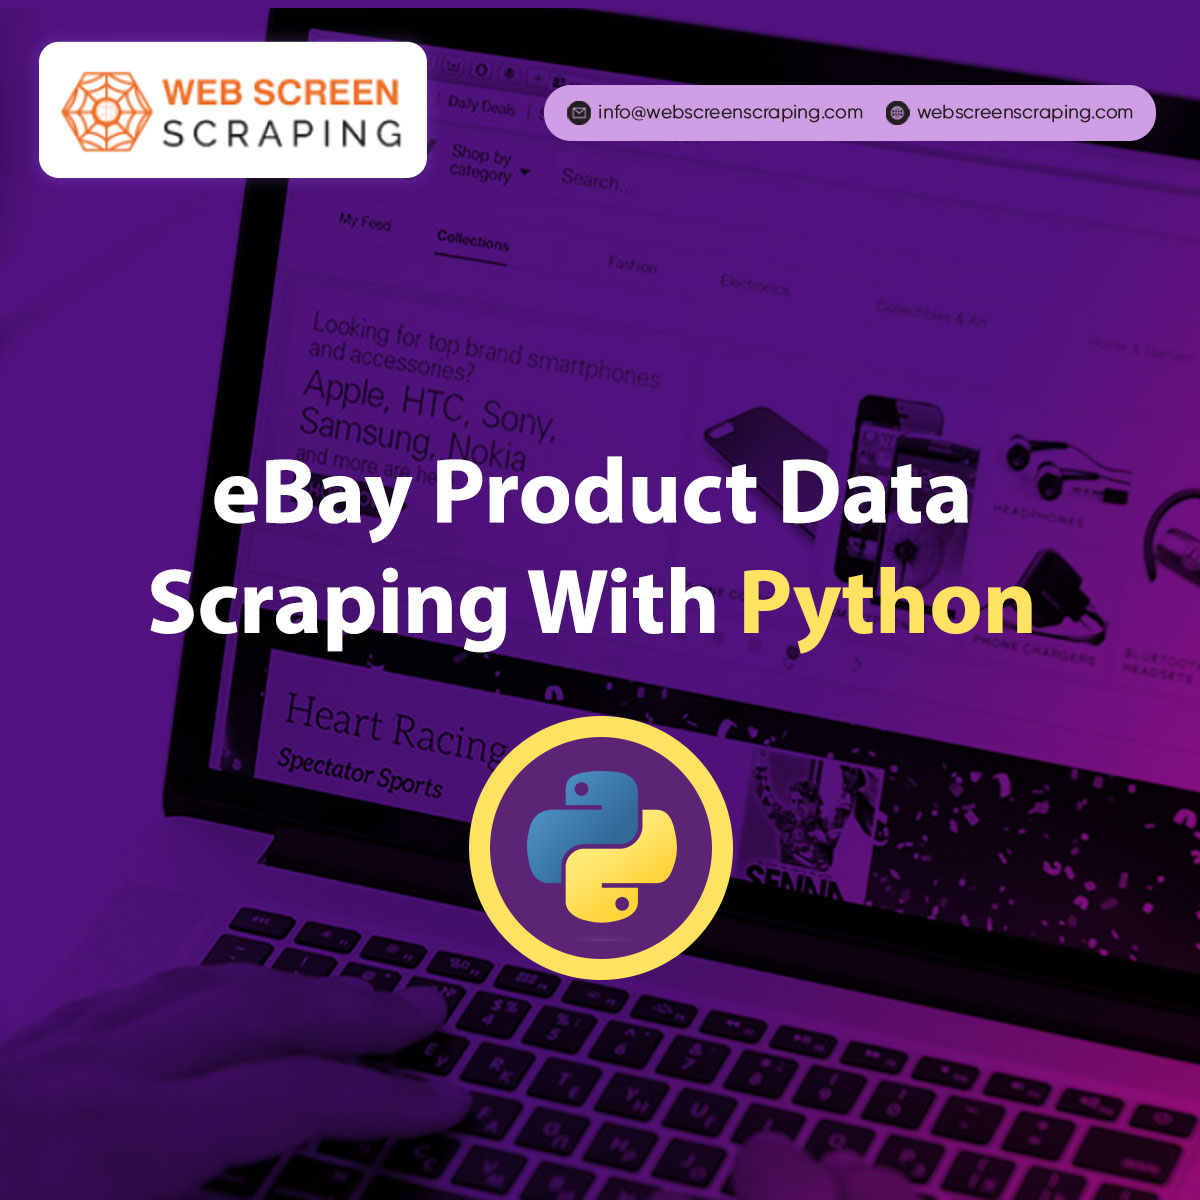 Dive into eBay product data scraping with Python! Follow our simple guide to harness valuable insights!

webscreenscraping.com/simple-way-to-…

#eBaydatascraping #pythonguide #ebayscrape #productdata #webextract #ebayproducts #datamining #pythonscript #webcrawler #webscreenscraping